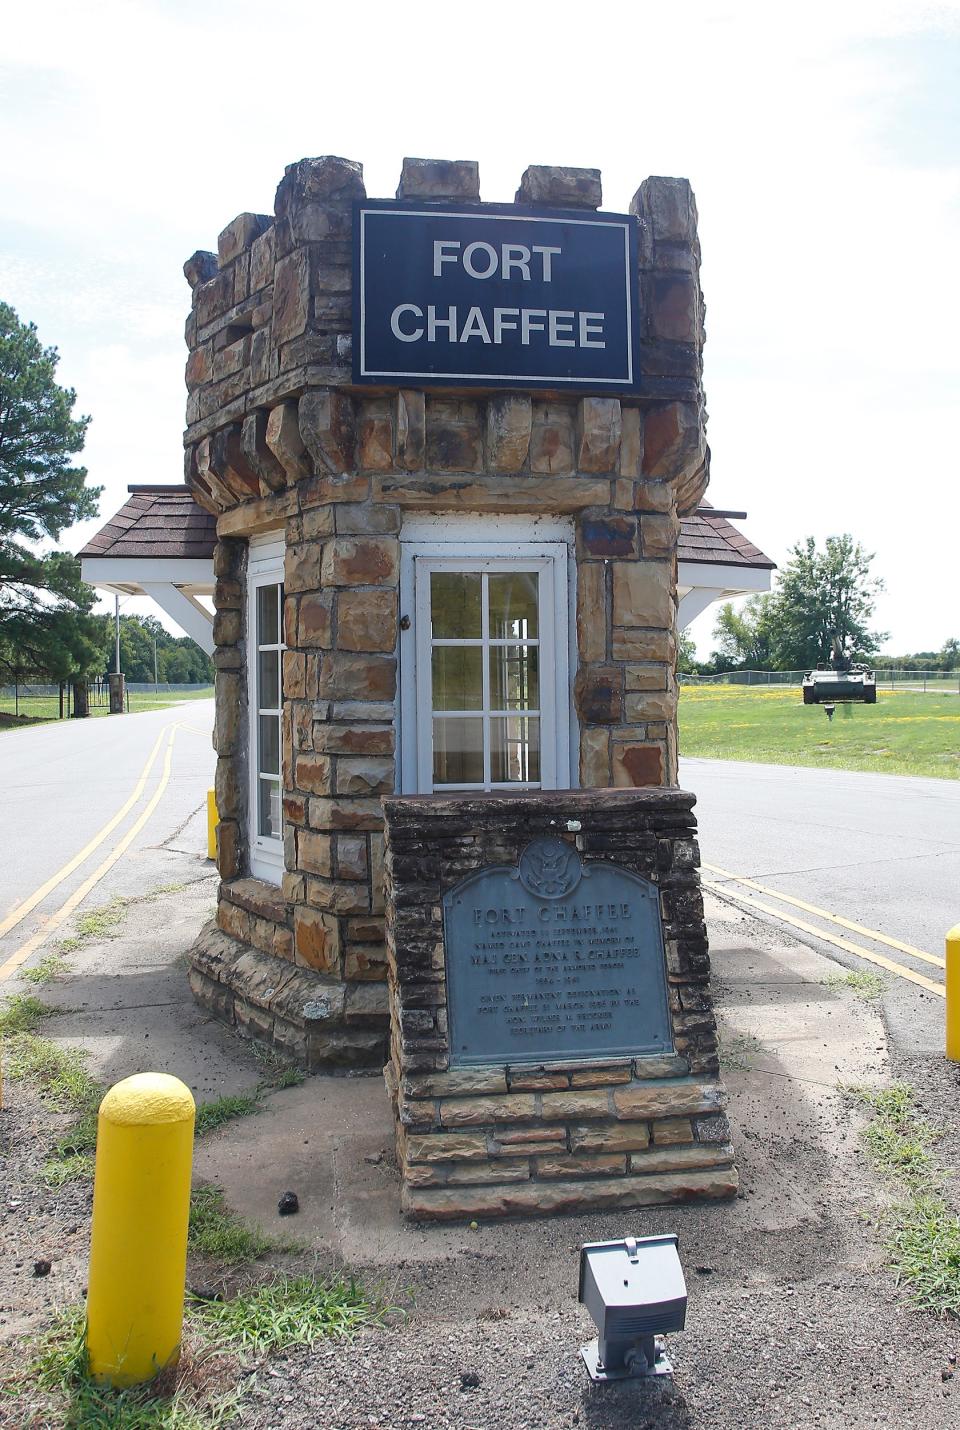 One of the original sentry posts for Fort Chaffee still stands near the main entrance to the base, which was originally constructed as Camp Chaffee in 1941. The base, located east of Fort Smith, serves as the Joint Maneuver Training Center with the Arkansas National Guard but all branches of the United States military will train at the base.